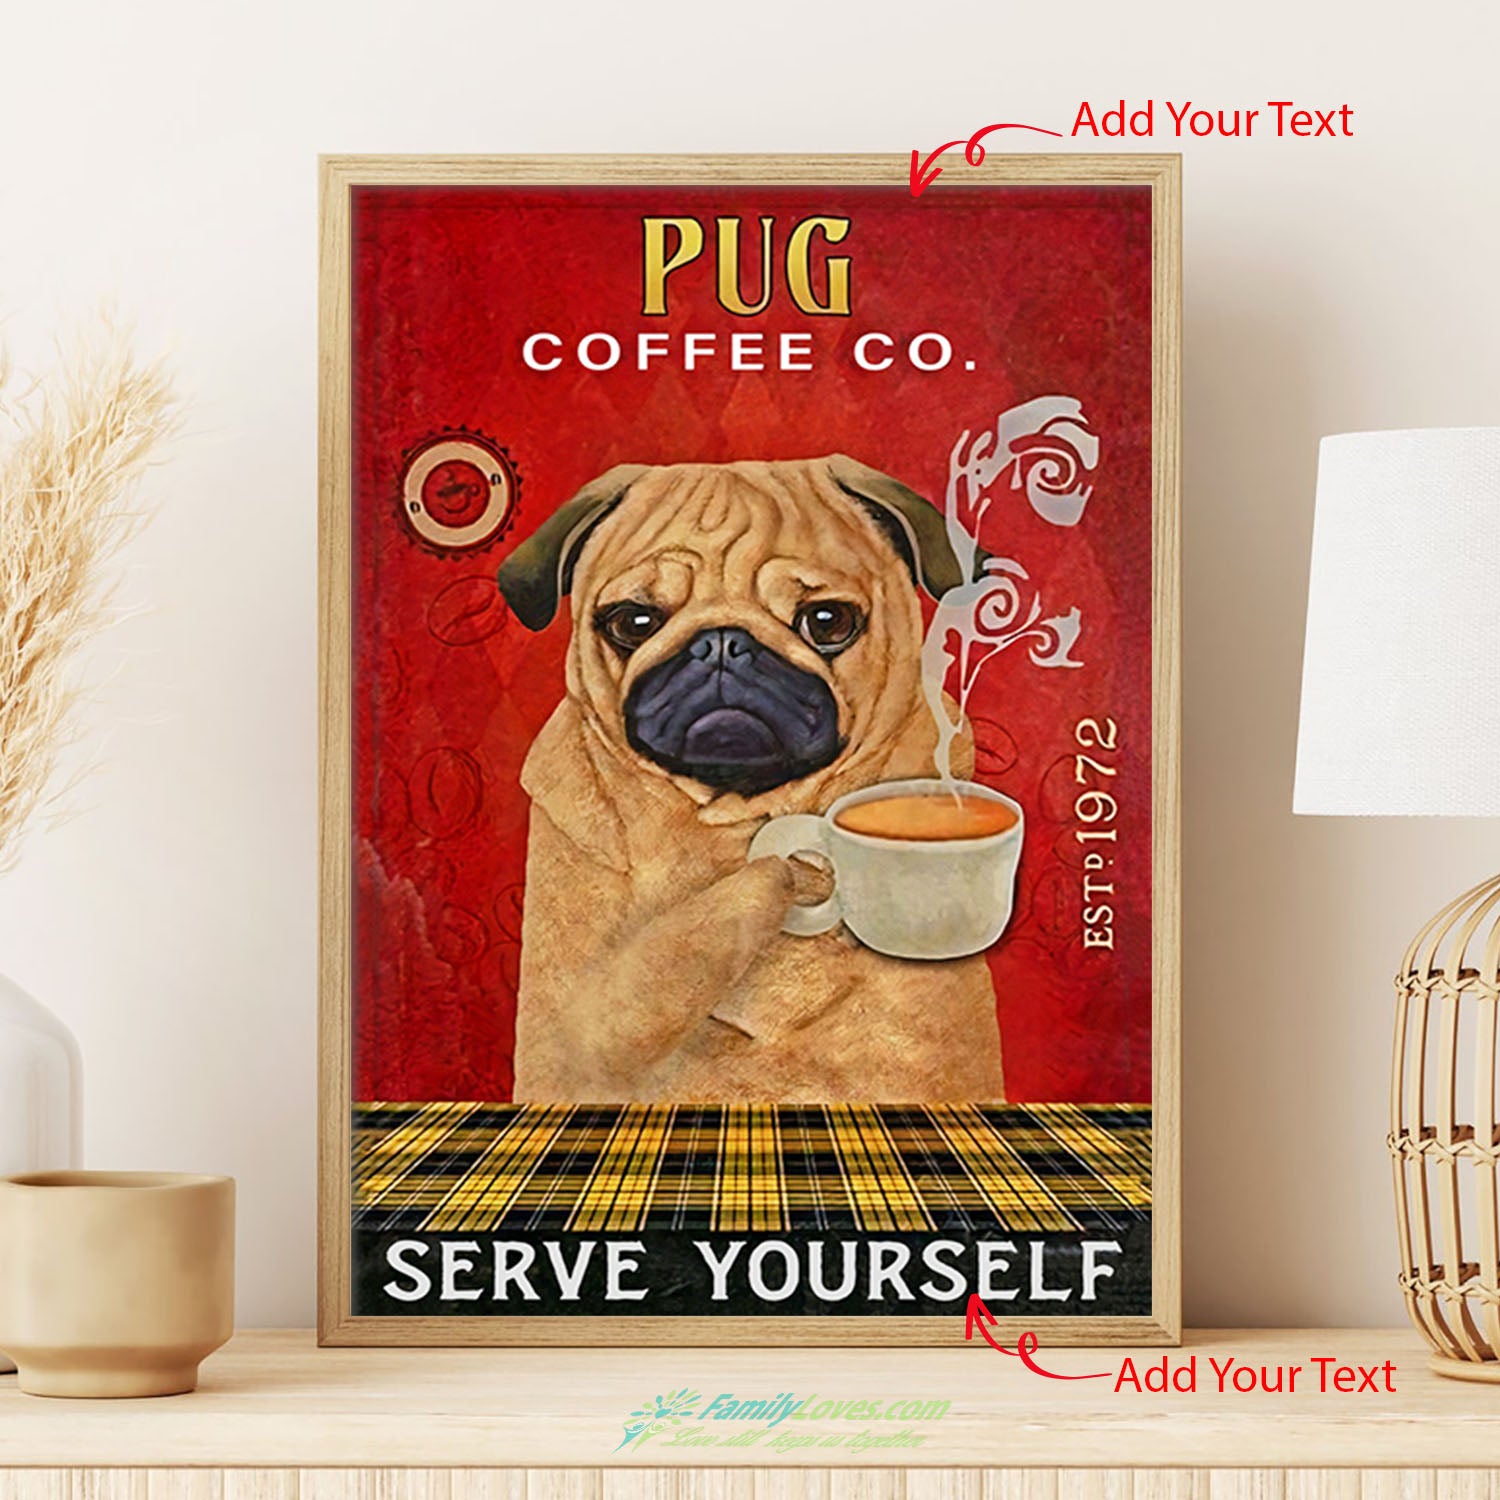 Coffee Company Pug Print Framed Wall Art Sign Anniversary Birthday Christmas Housewarming Gift Home Canvas Paint Poster Holder All Size 1